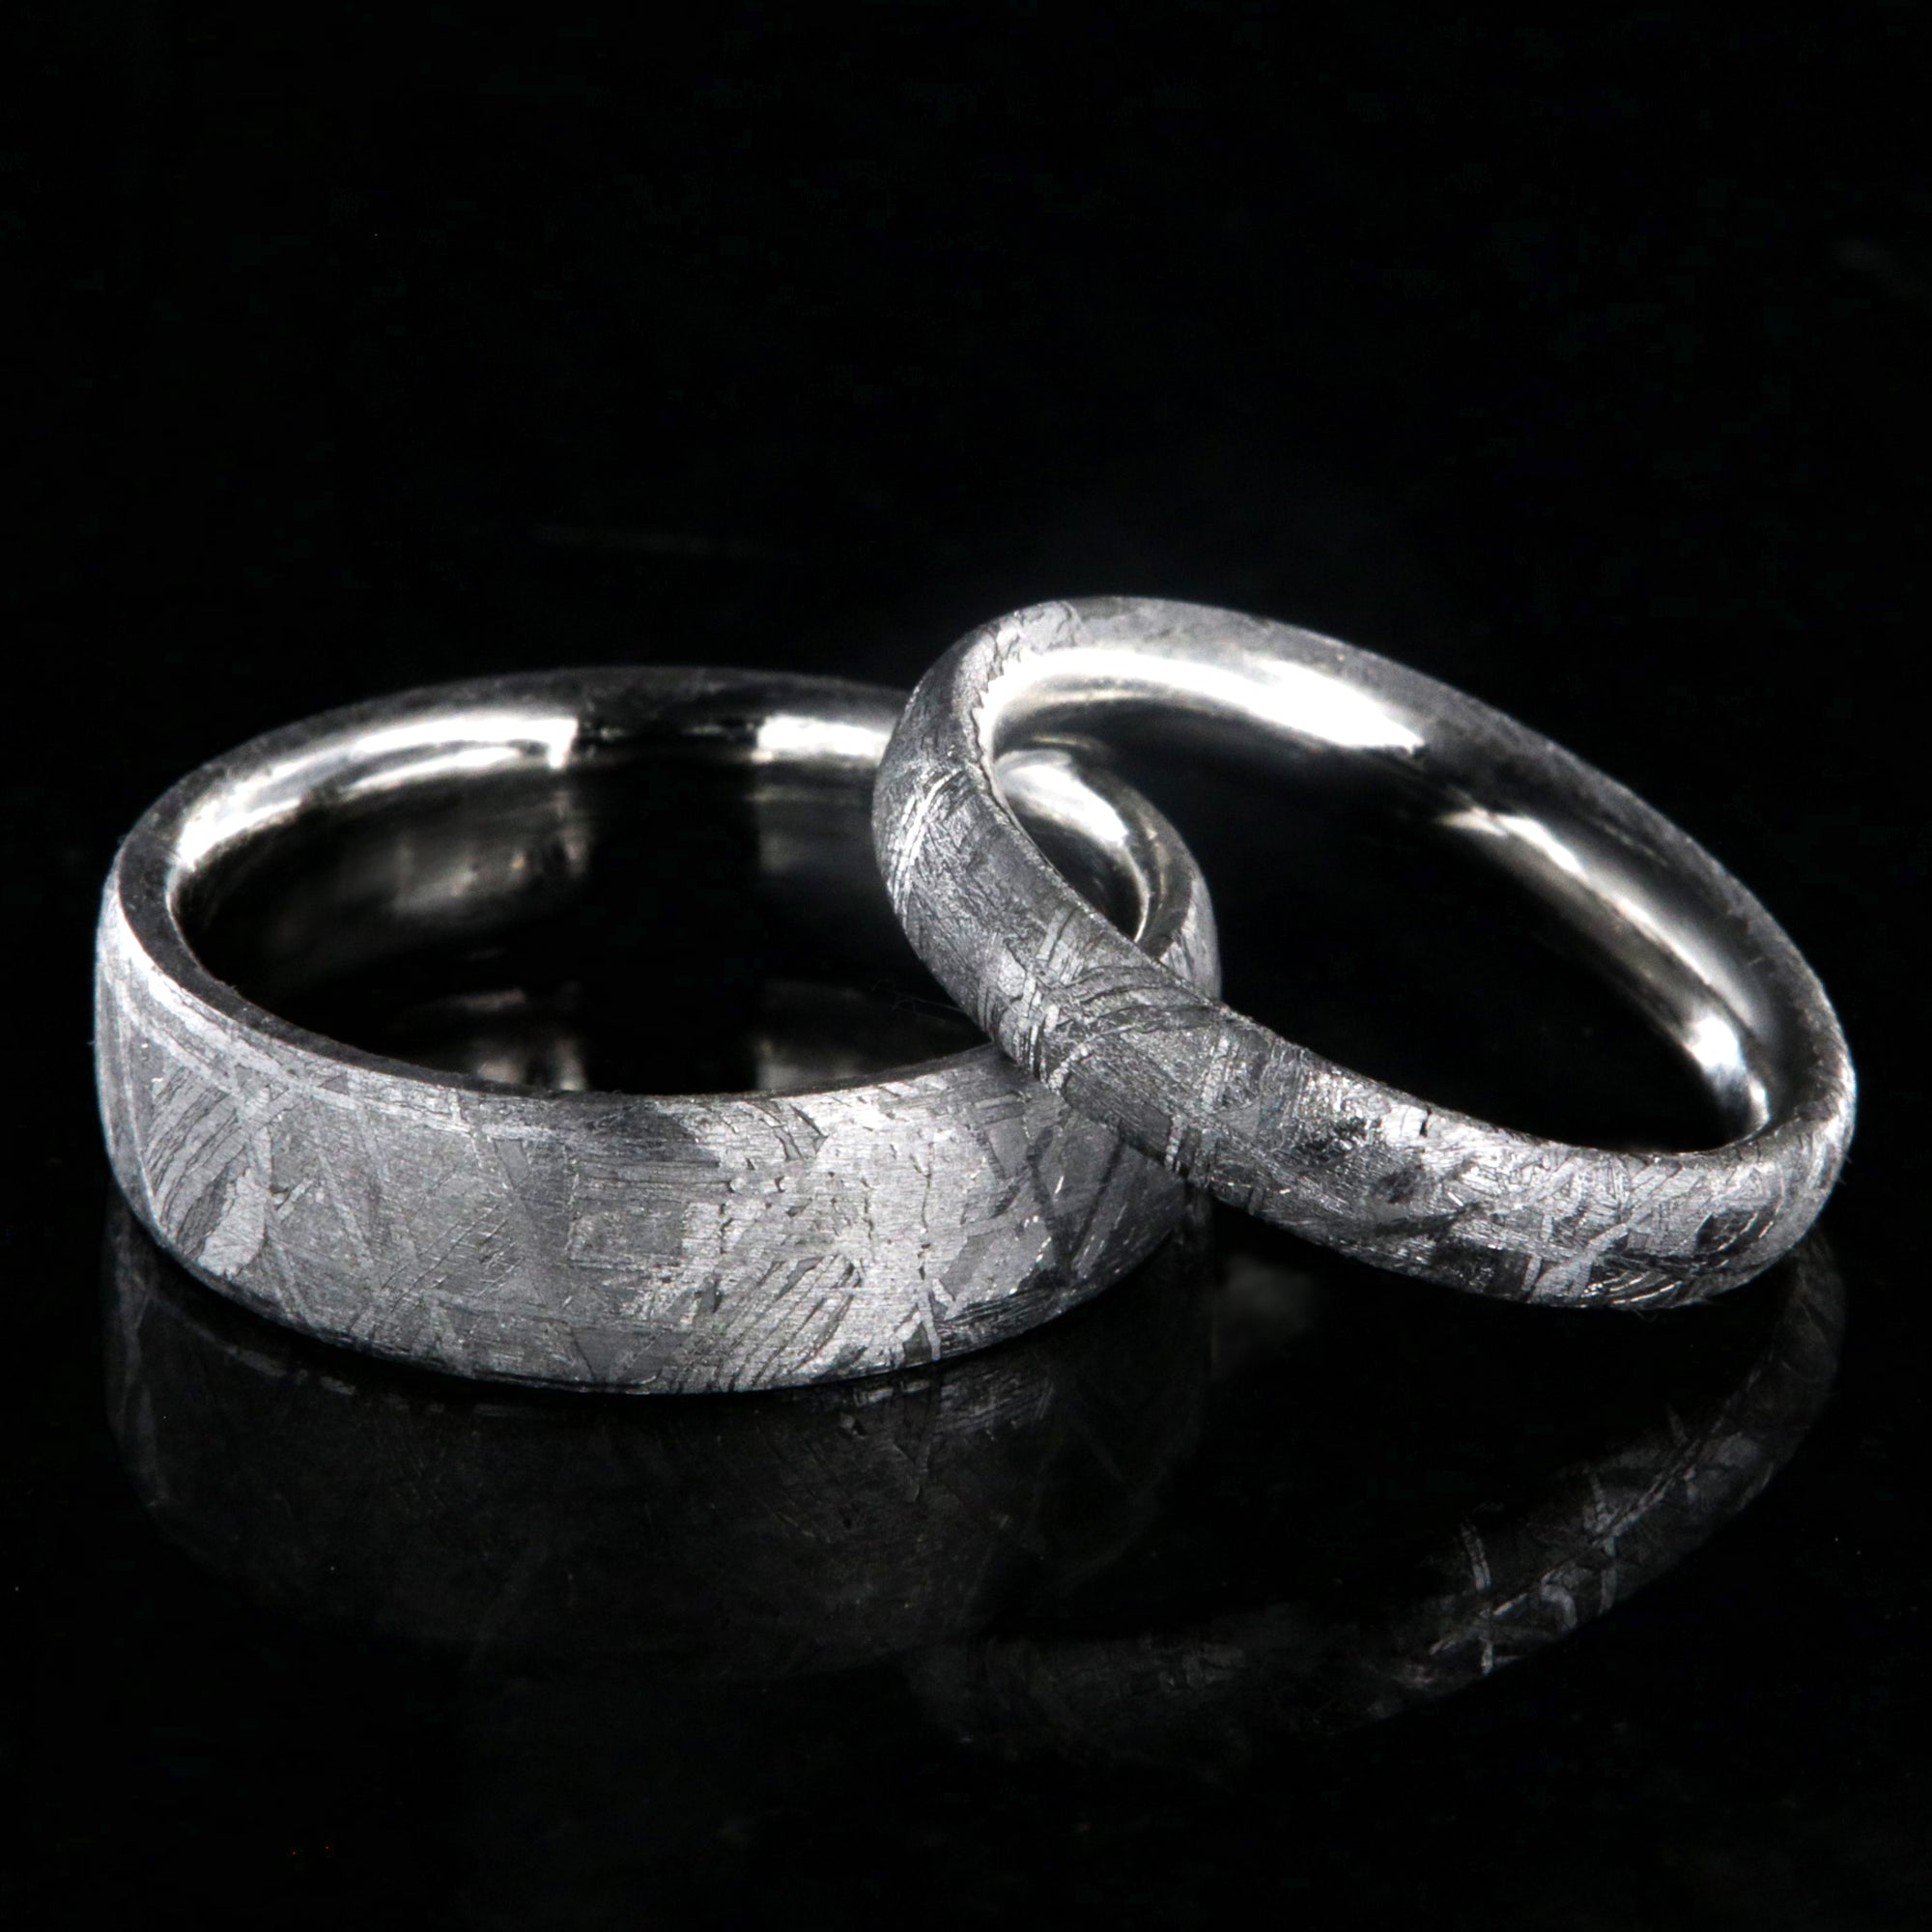 His and her ring set with 6mm wide Gibeon meteorite band and matching 3mm wide meteorite band